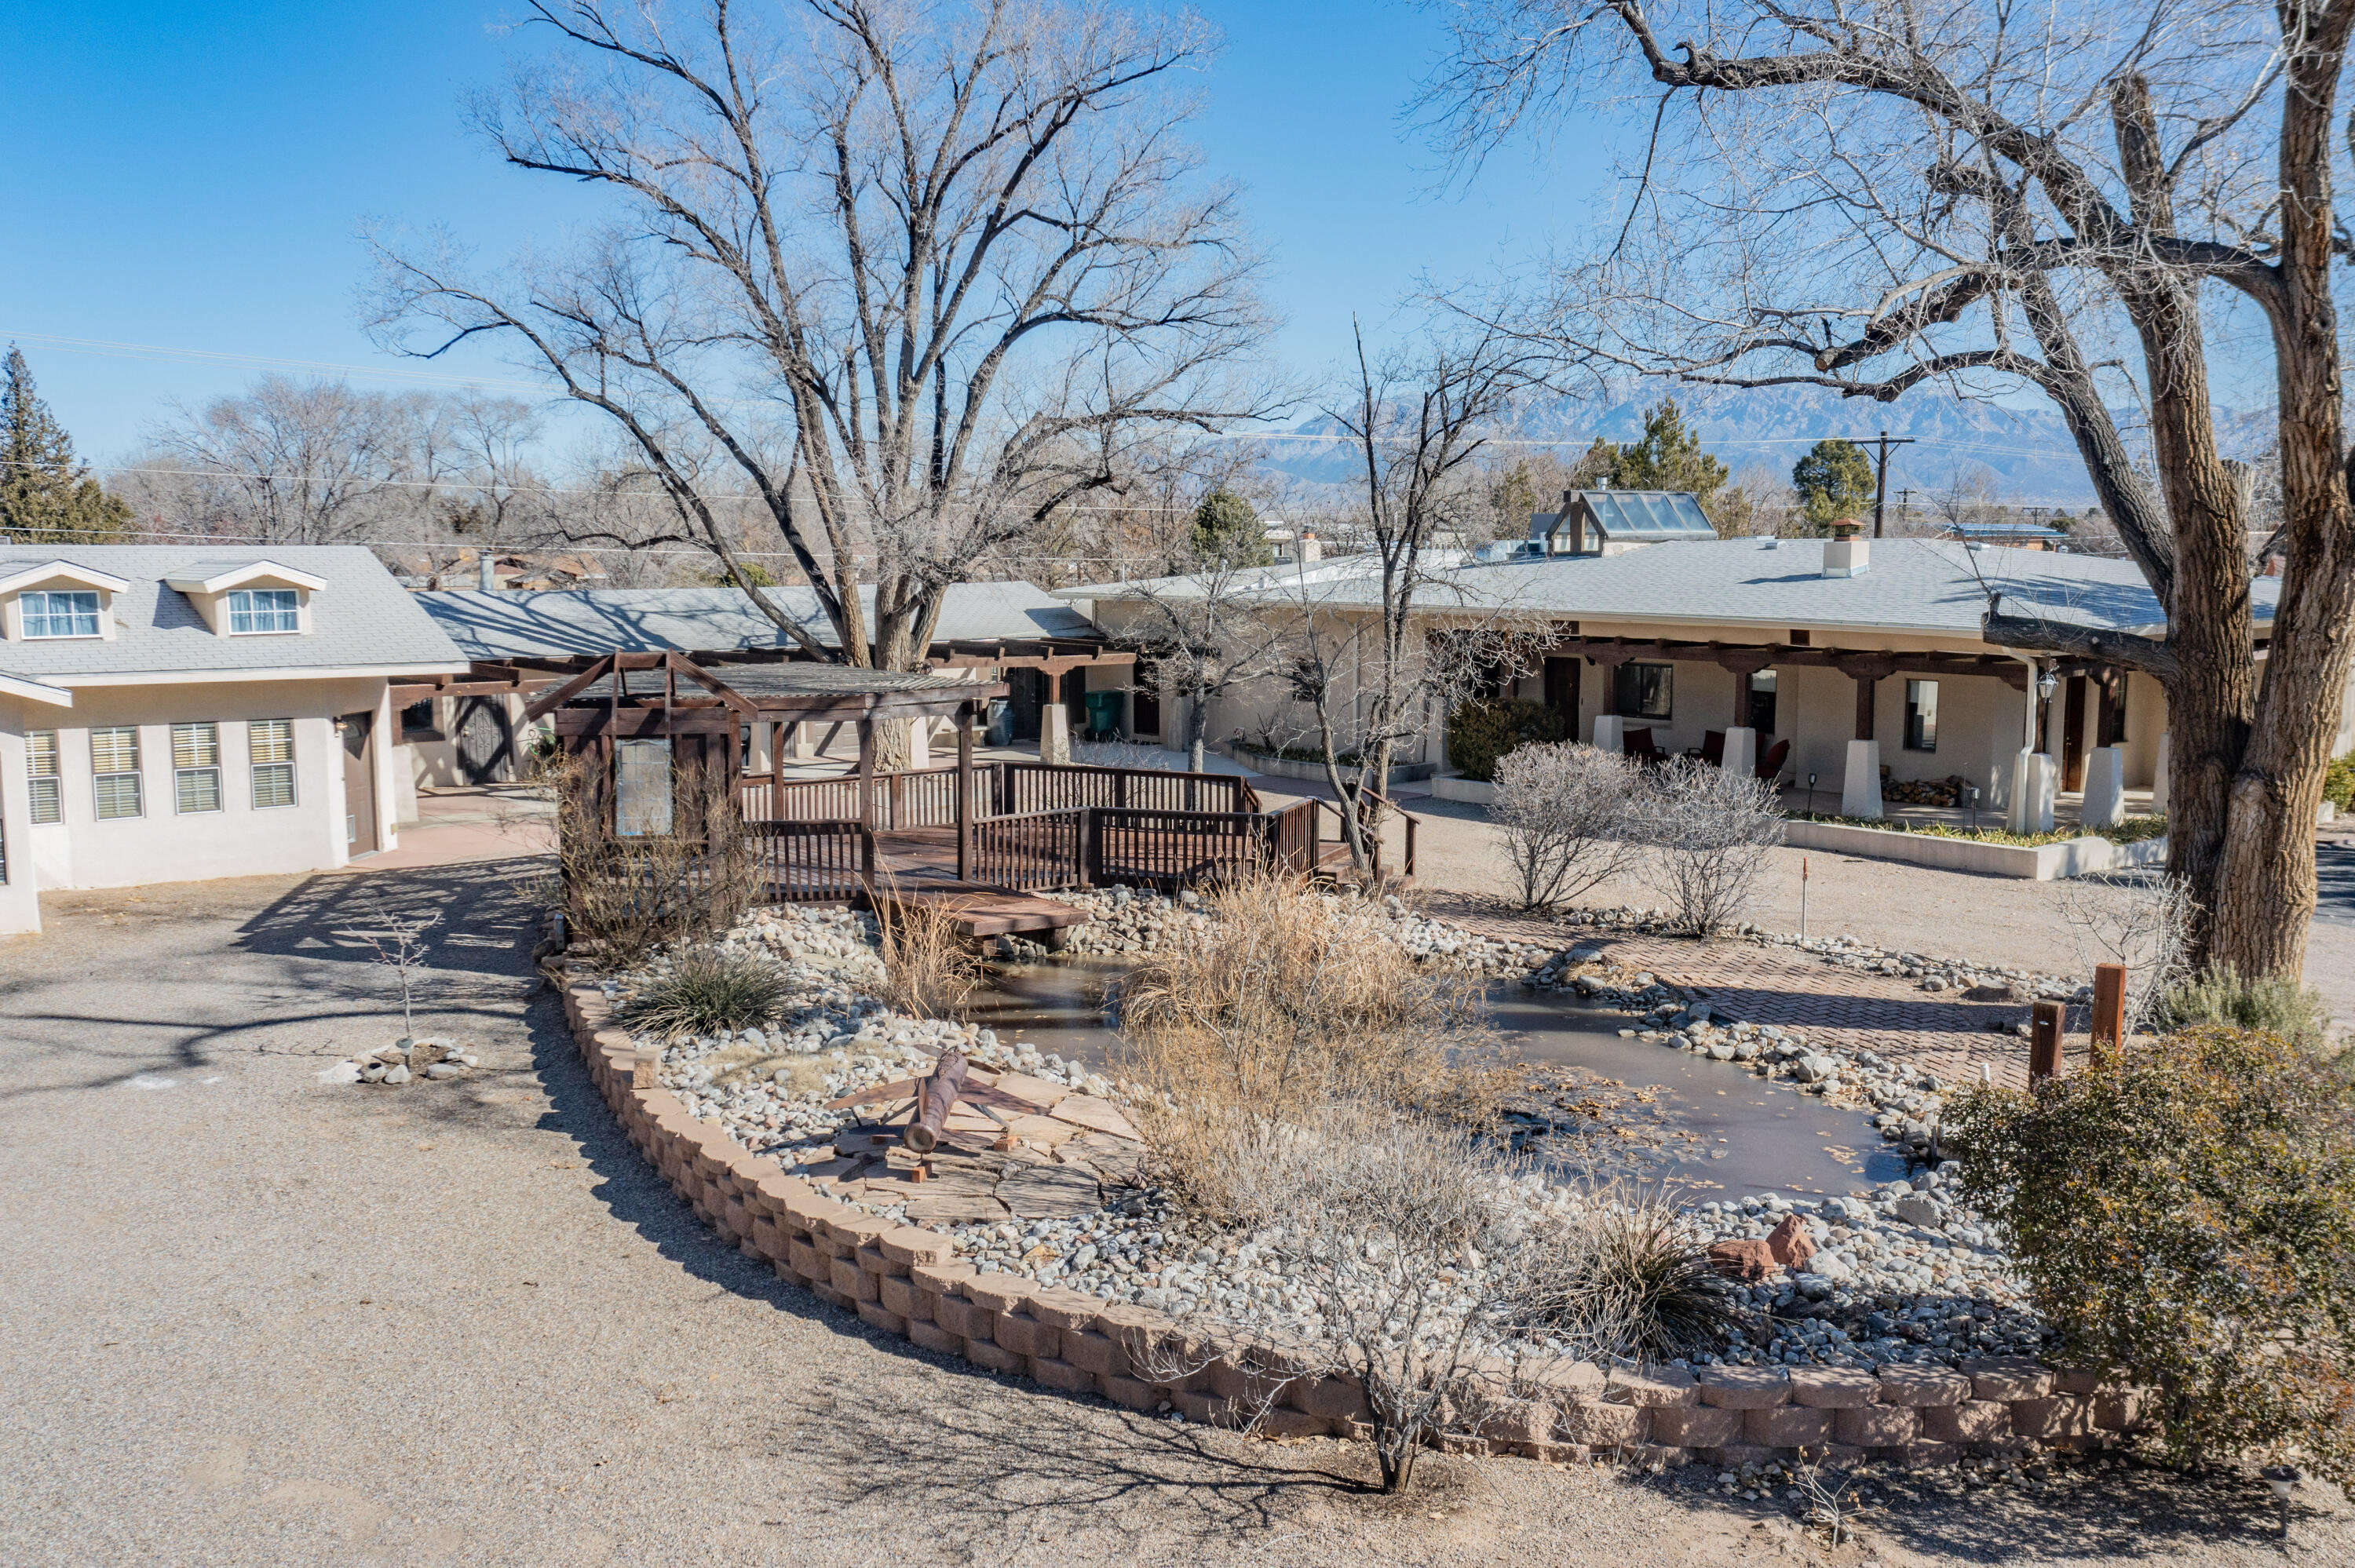 Here's a rare opportunity to take a step back in time and own a little piece of Albuquerque history.  This uniquely elegant, turn-of-the-century, pool home is nestled beneath mighty cottonwoods and is constructed out of 18'' thick hand-honed ''Terrone'' Adobe. The main home, built in 1930, features a split bedroom floor plan and has been lovingly maintained and updated. You'll enjoy coming home to your cathedral skylight, chef-inspired KitchenAid kitchen and spa-inspired marble clad primary ensuite.  The original oak floors are perfectly flanked by the rough sawn oak ceilings and beams.  The square footage includes a 2002, 1200 sf  2bed 2bath full-kitchen guesthouse.  The 1 acre of walled and fenced land comes complete with a newly resurfaced heated gunite pool, and more. Cont. on attached